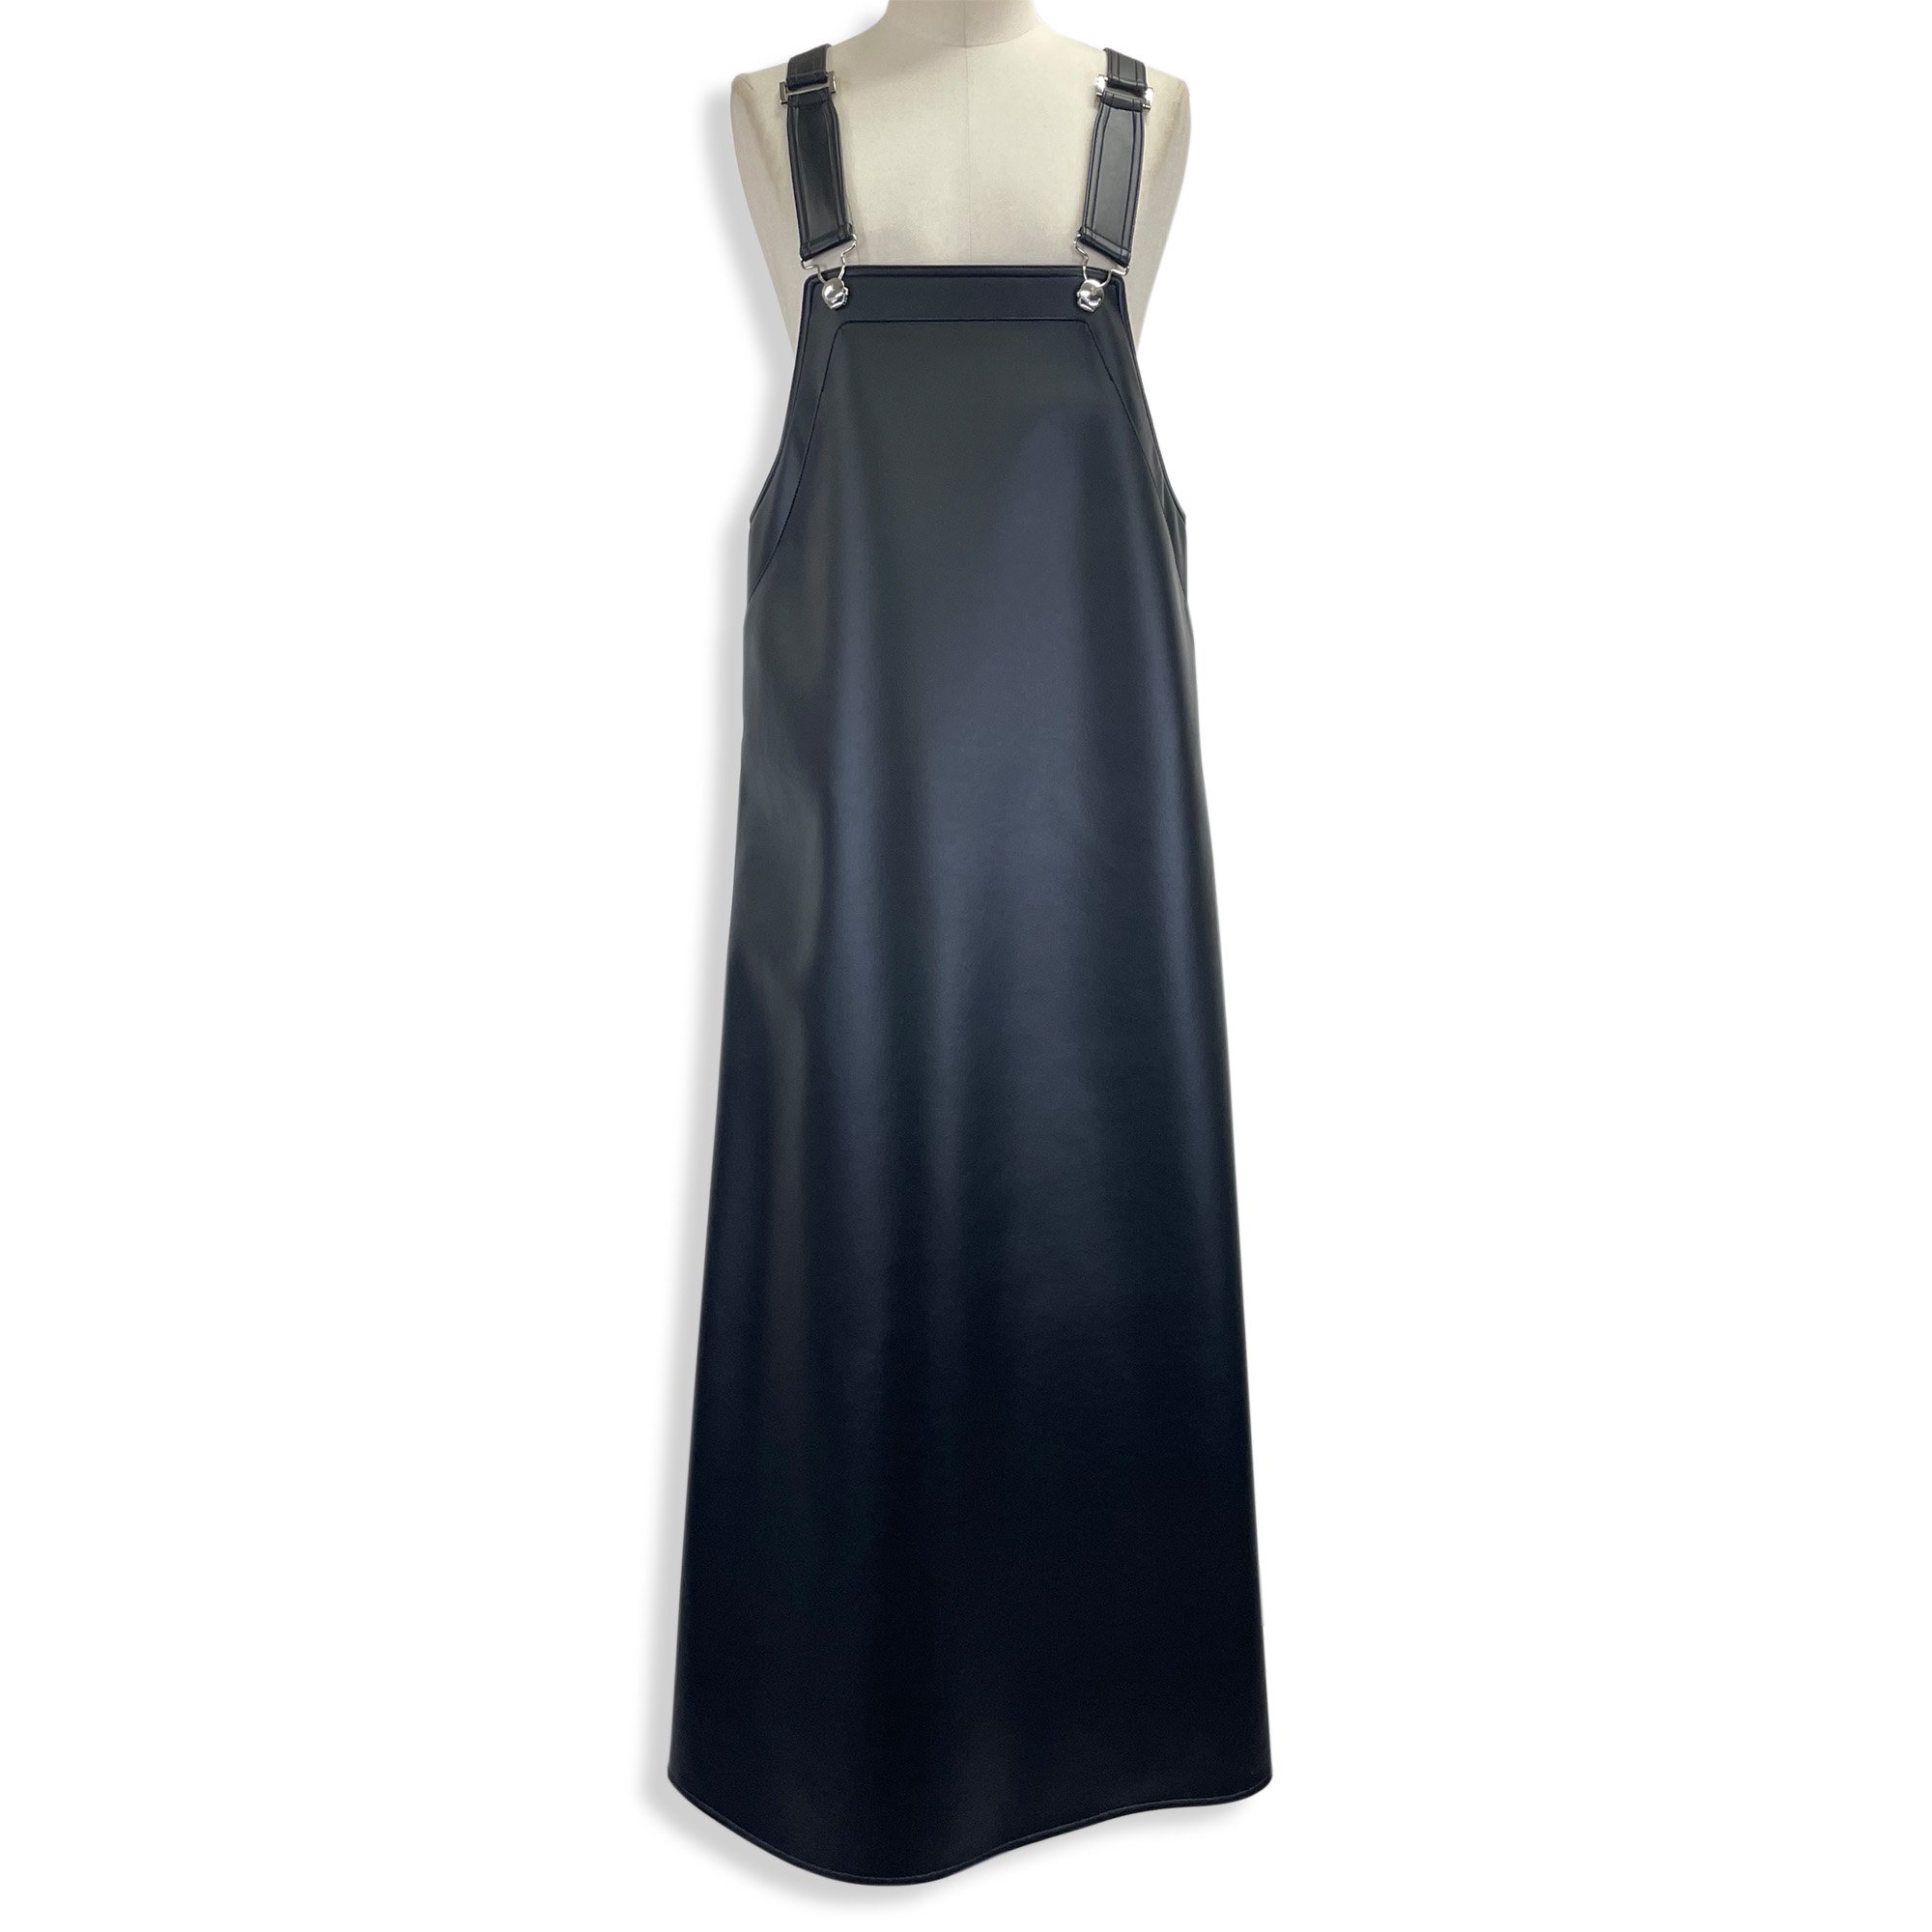 <img class='new_mark_img1' src='https://img.shop-pro.jp/img/new/icons7.gif' style='border:none;display:inline;margin:0px;padding:0px;width:auto;' />THE RERACS SYNTHETIC LEATHER THE APRON DRESS
【BLACK】